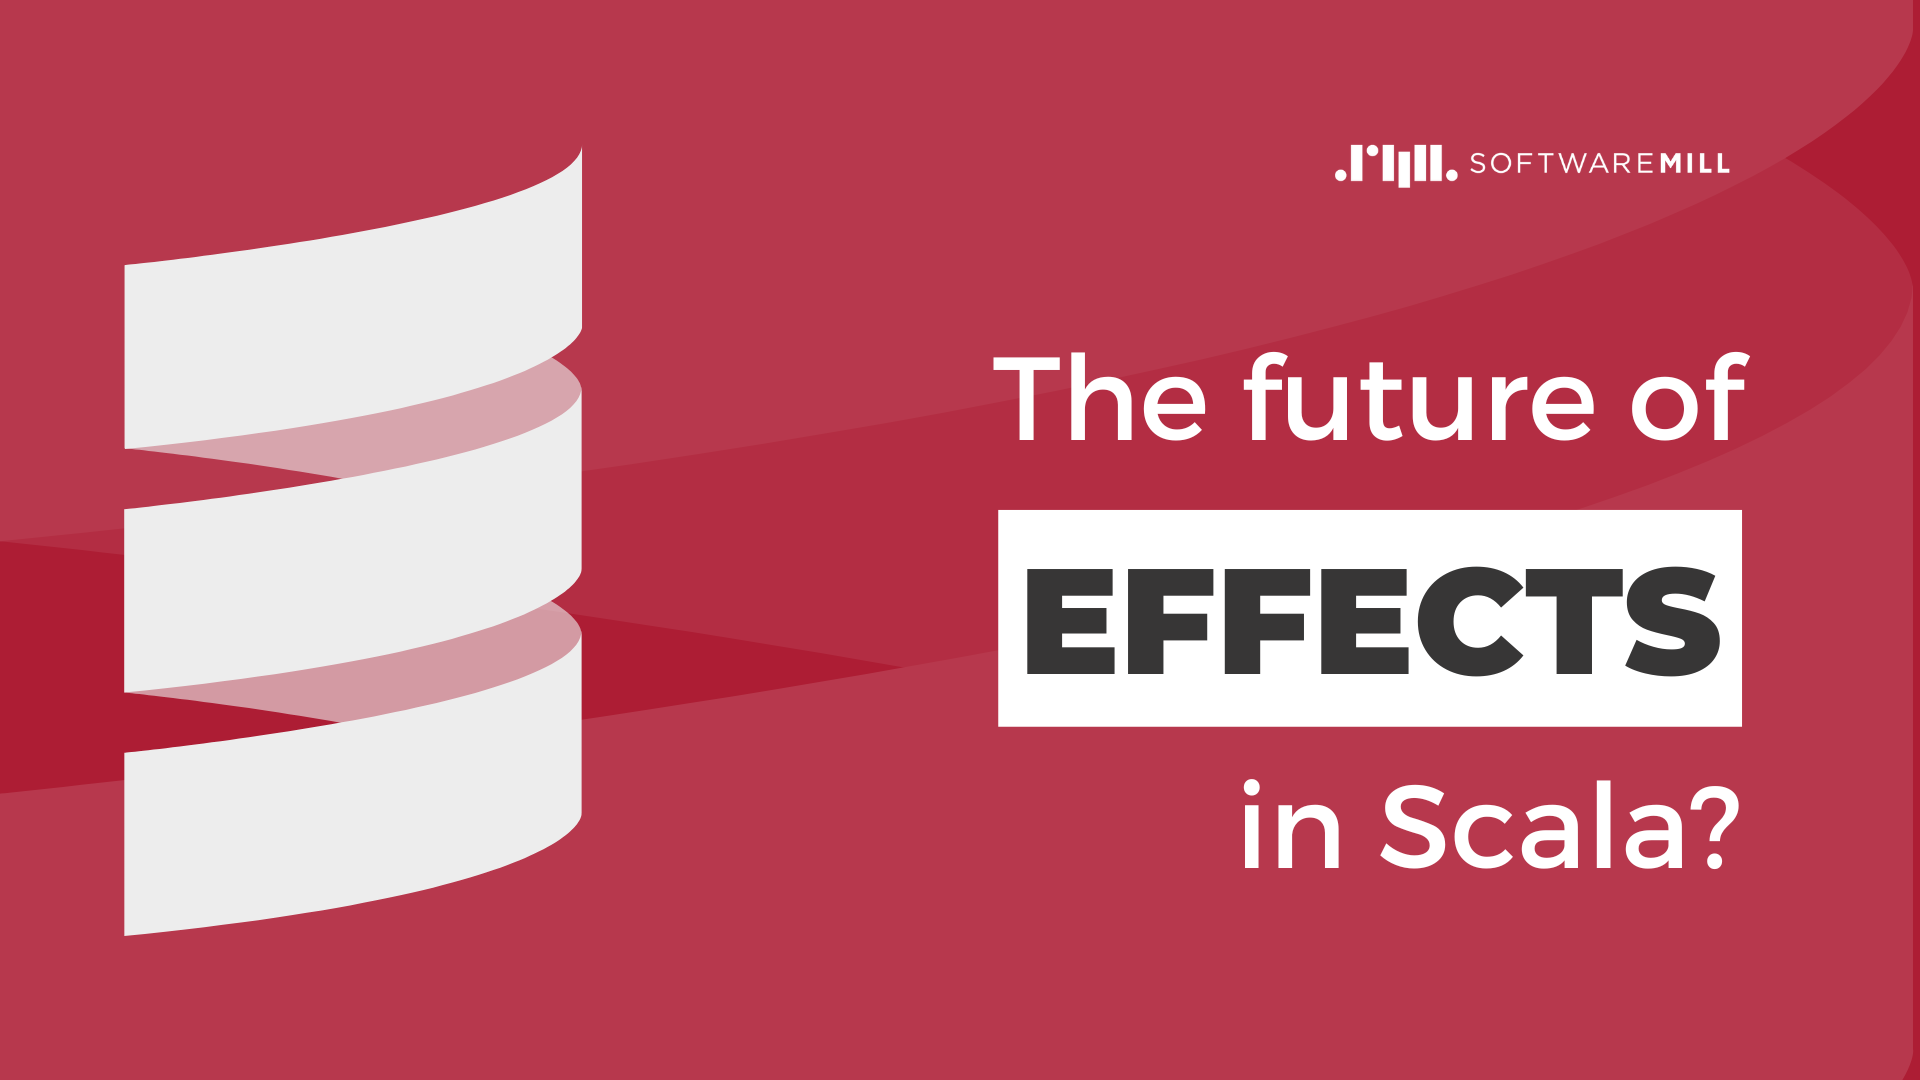 The future of effects in Scala? webp image